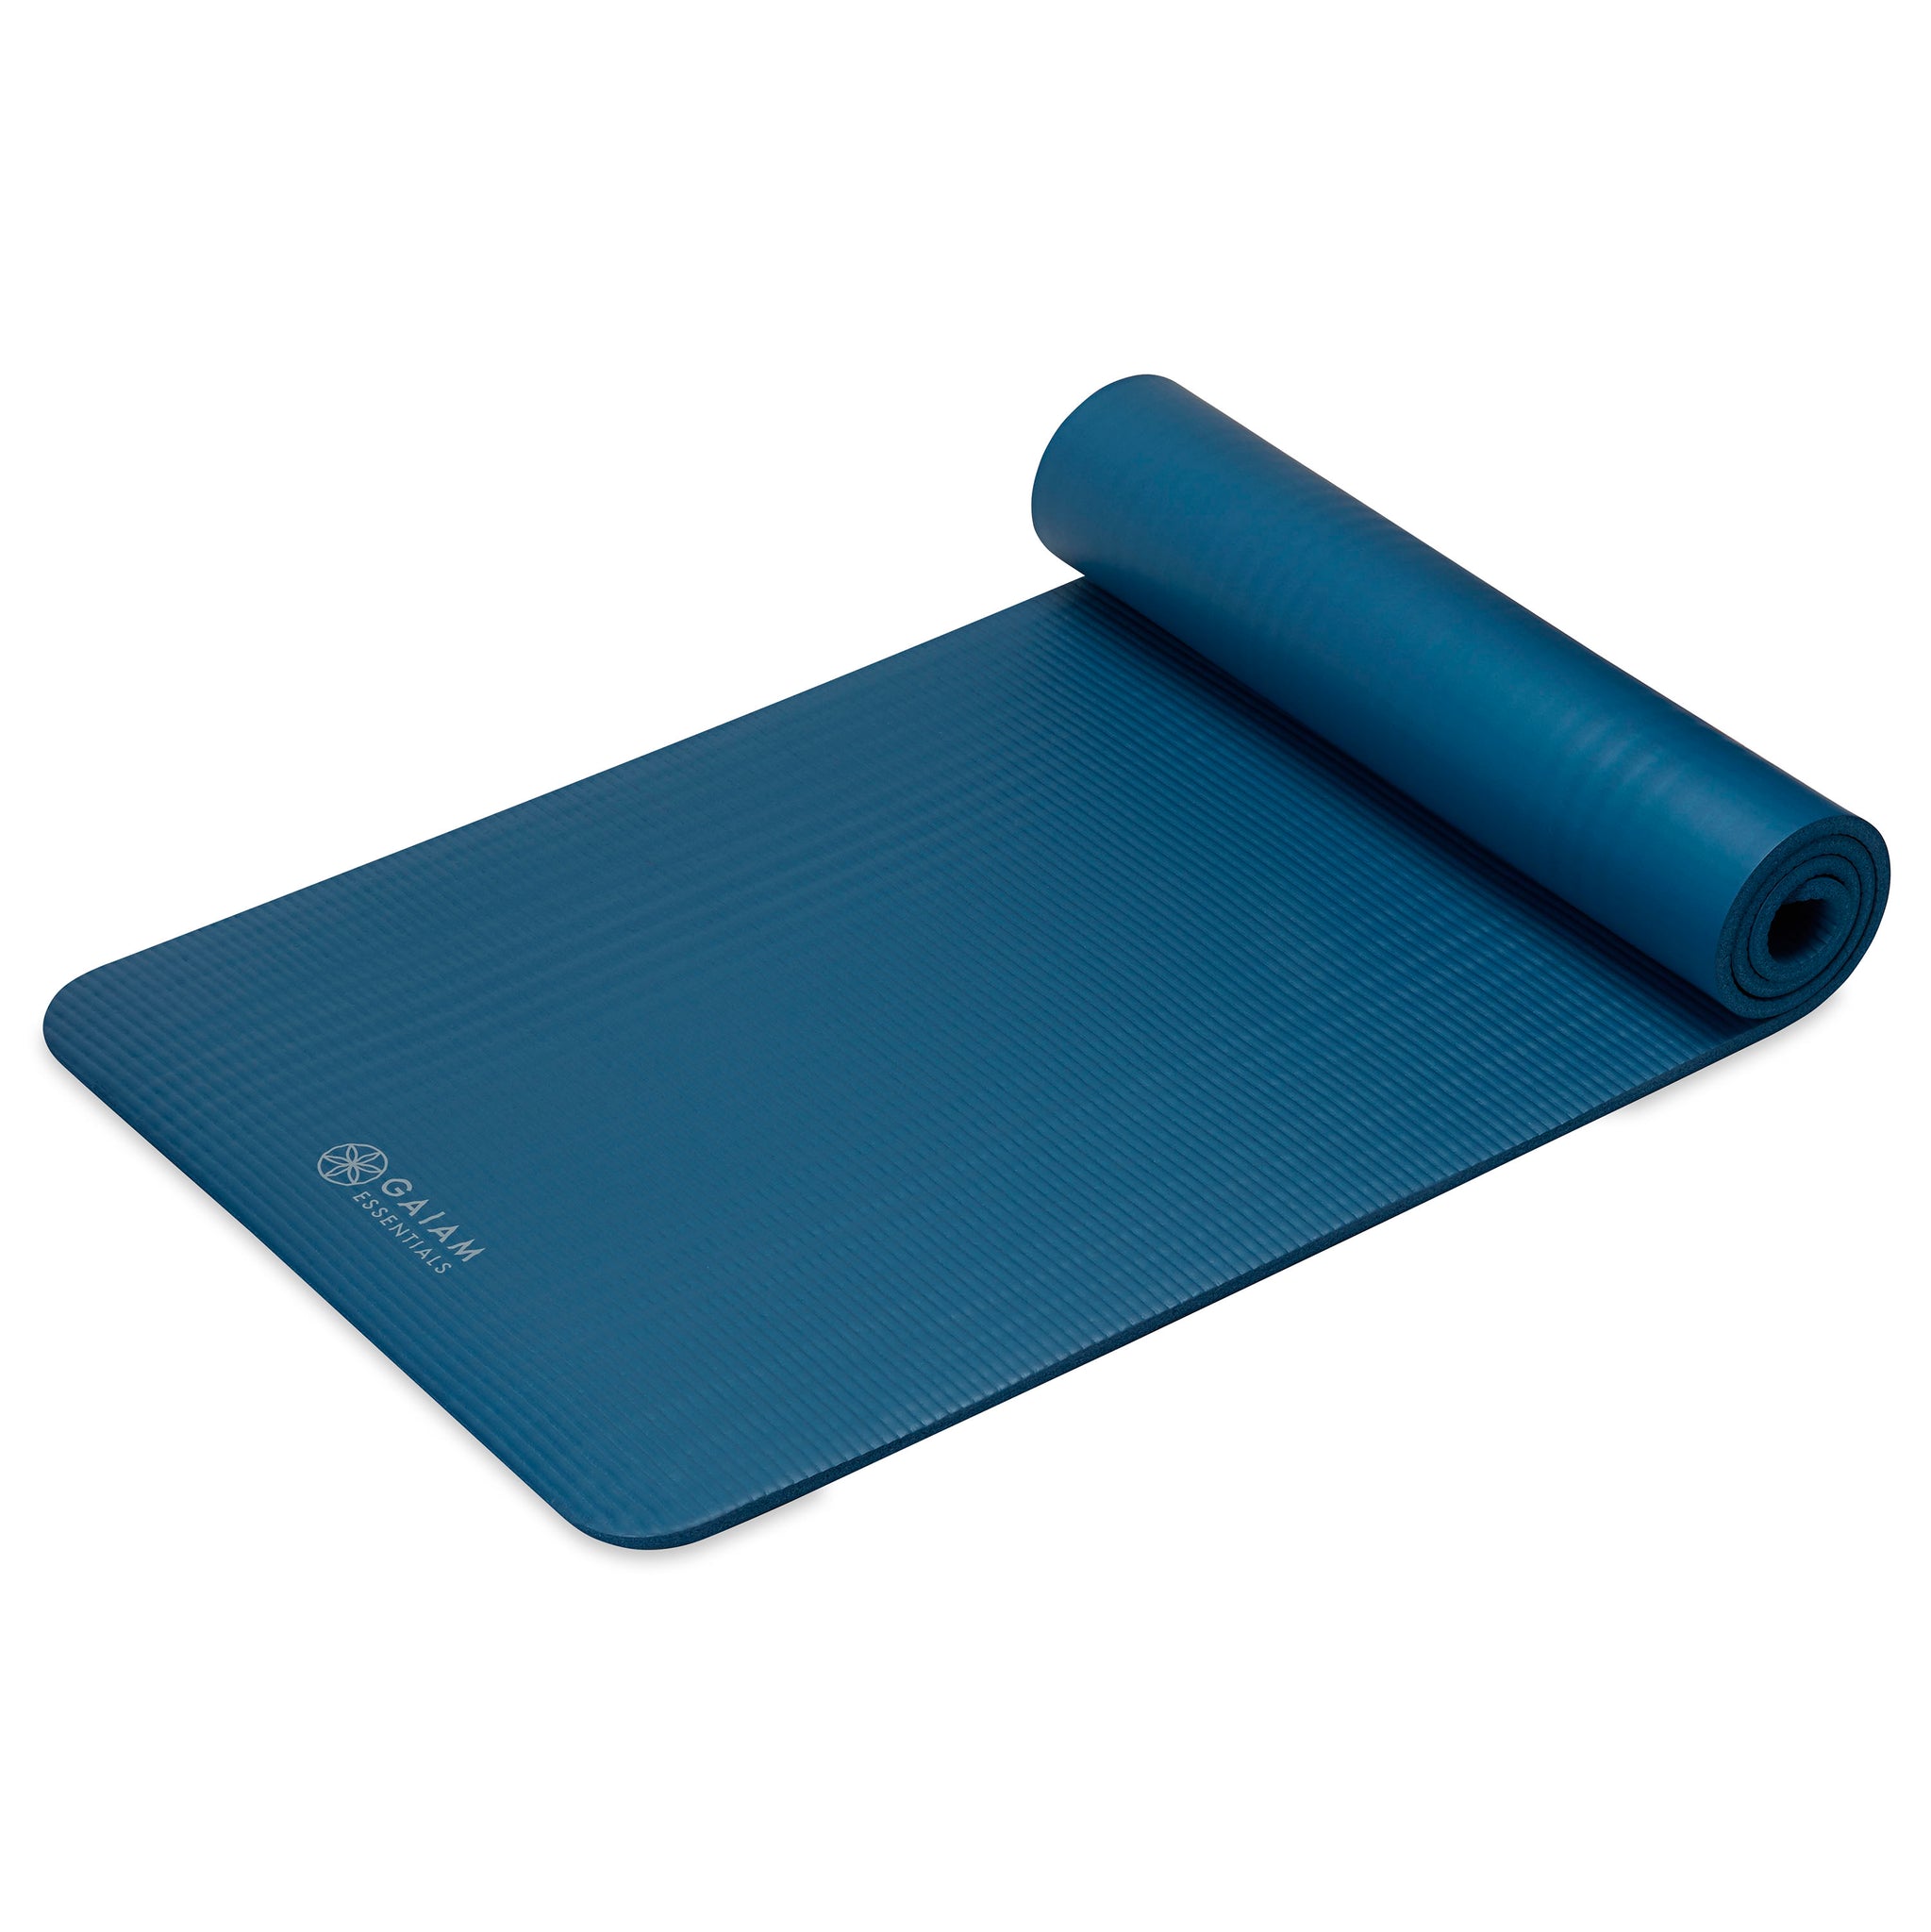 Gaiam Yoga Mat 4mm - Center in the Heights